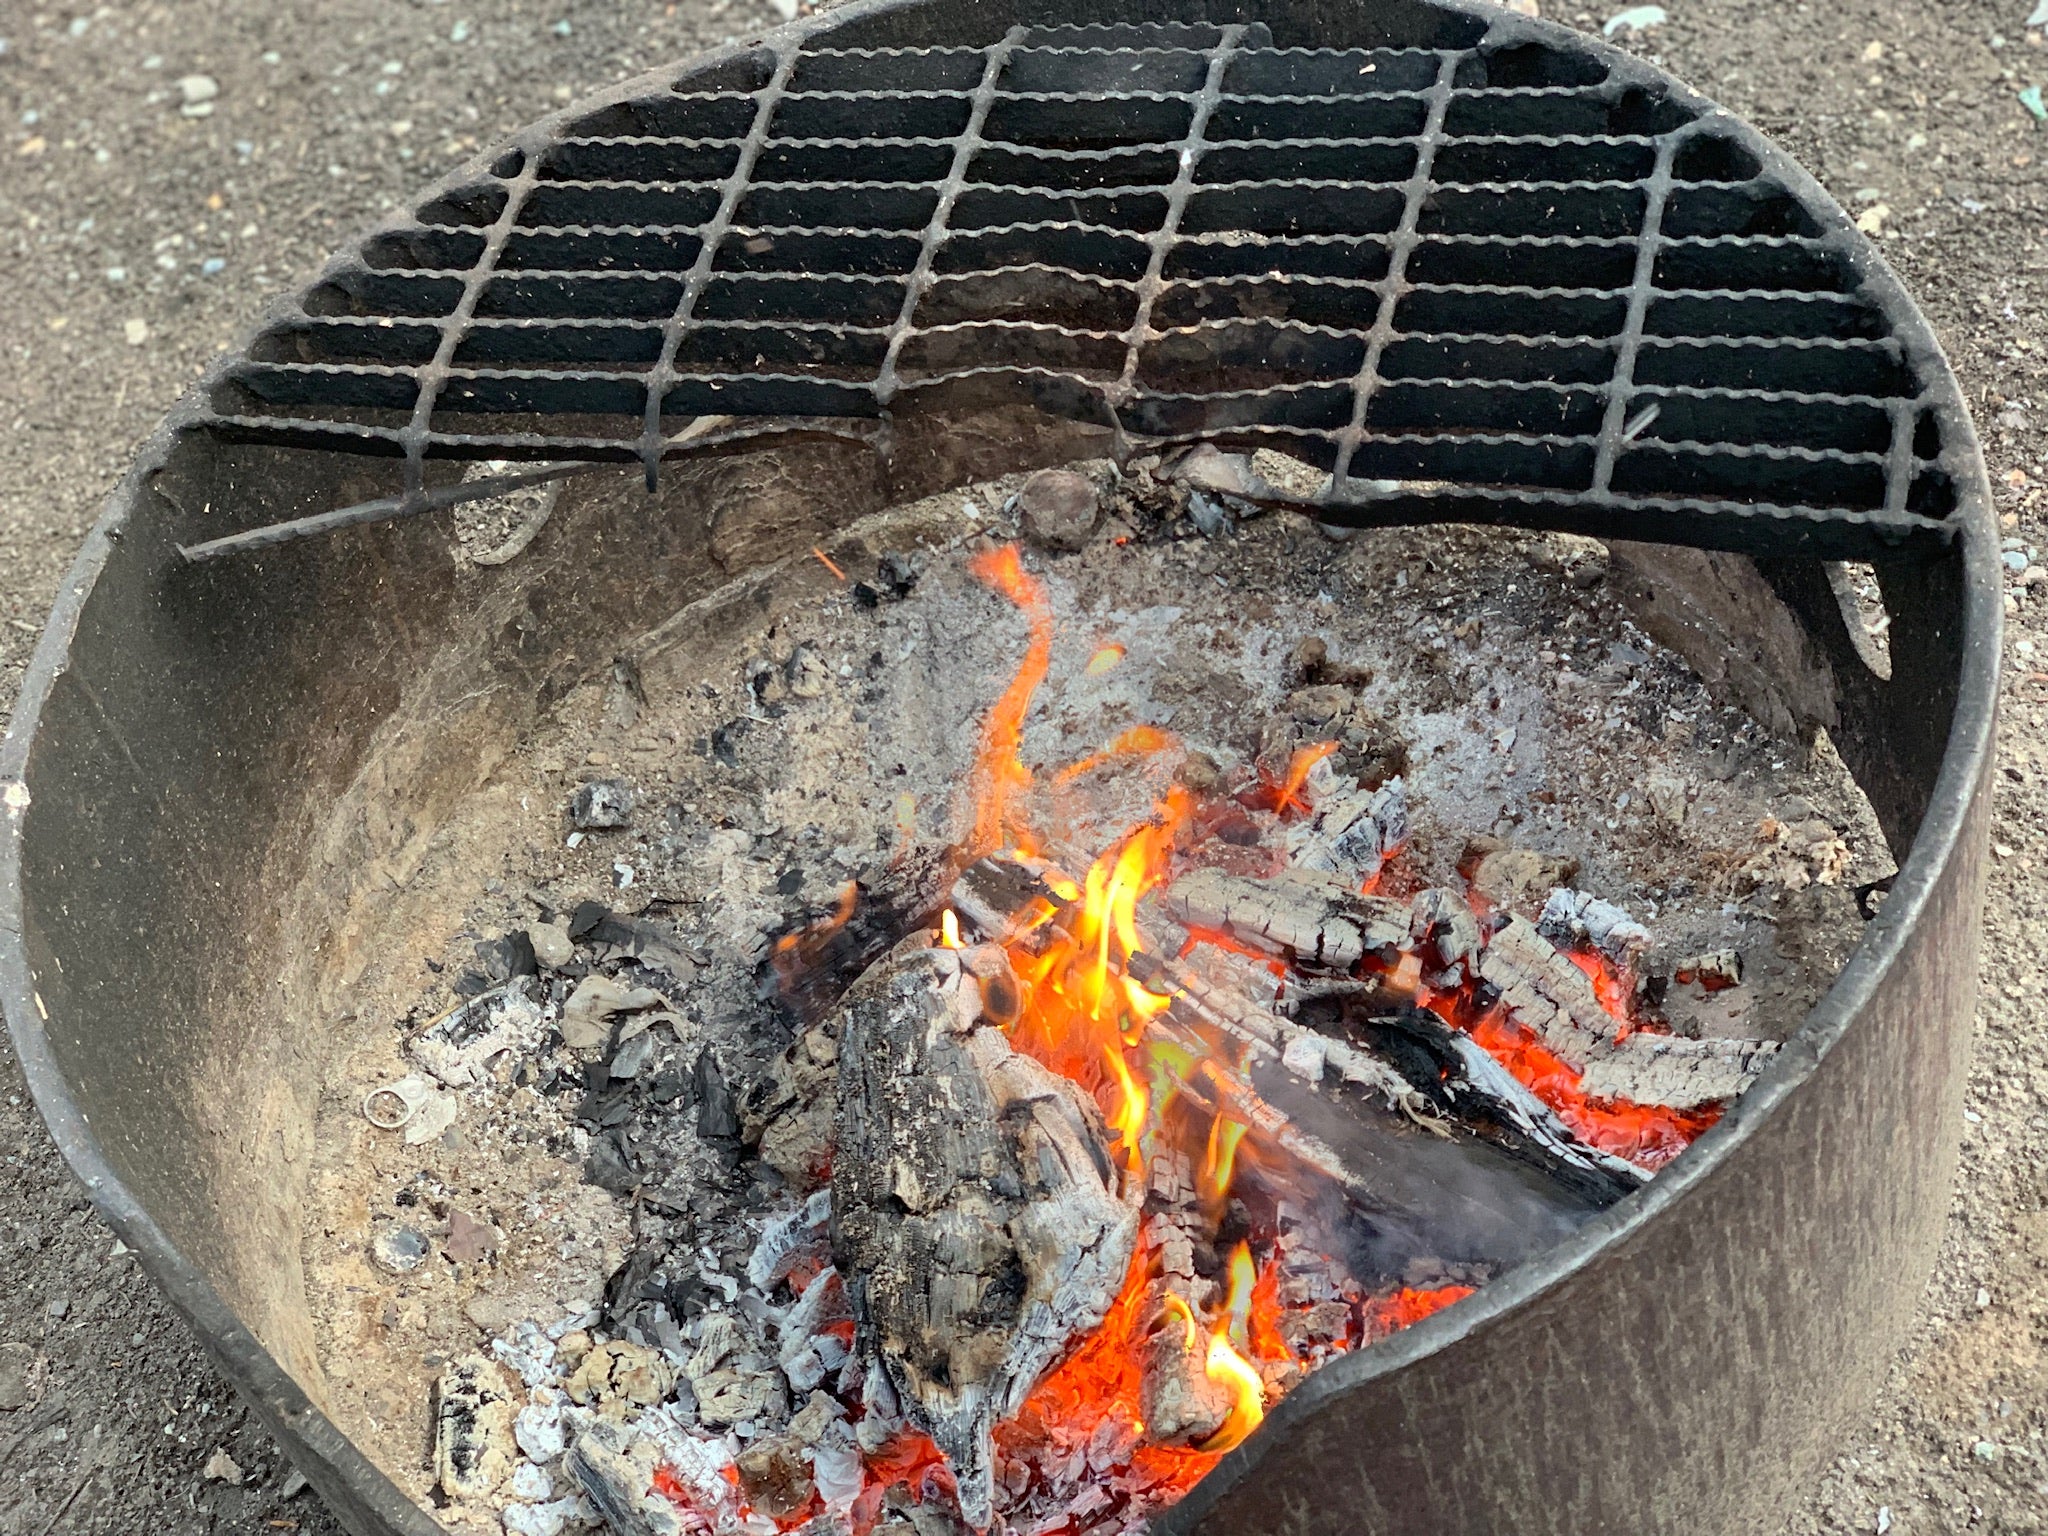 Clean sites with fire ring